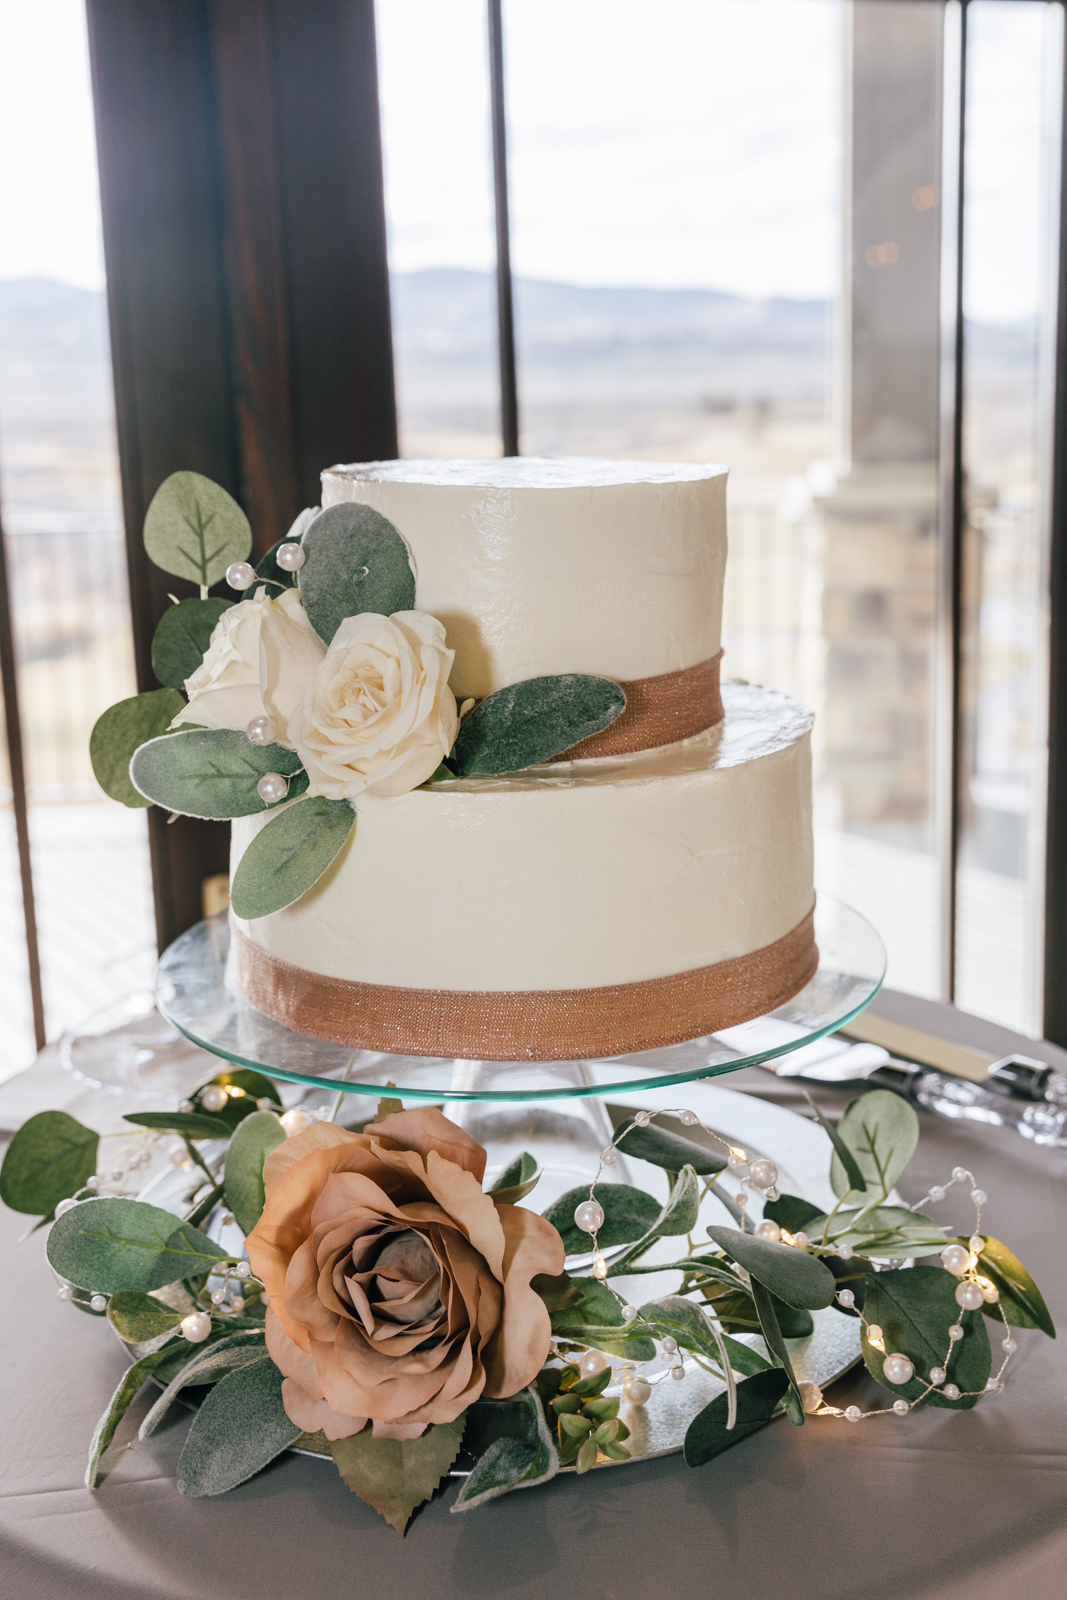 Pocatello wedding cake with two tiers and bronze details